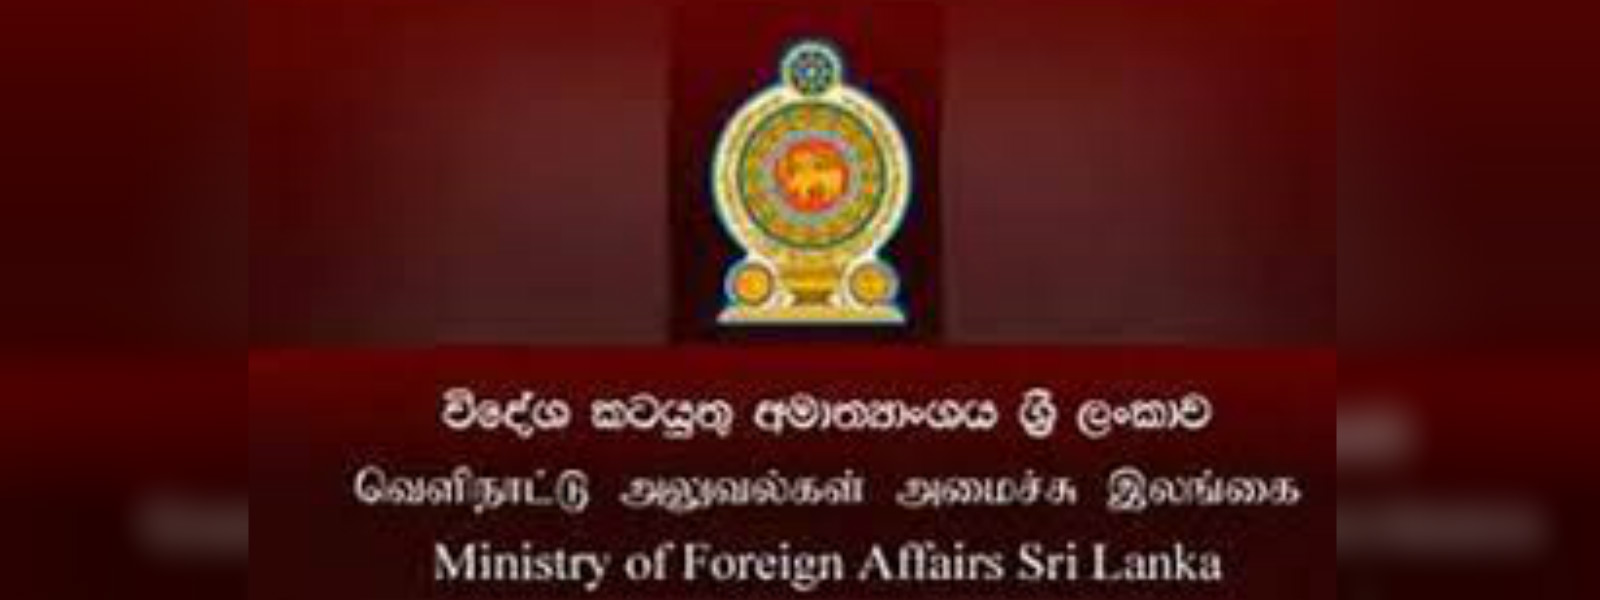 Three high ranking officials to arrive in SL